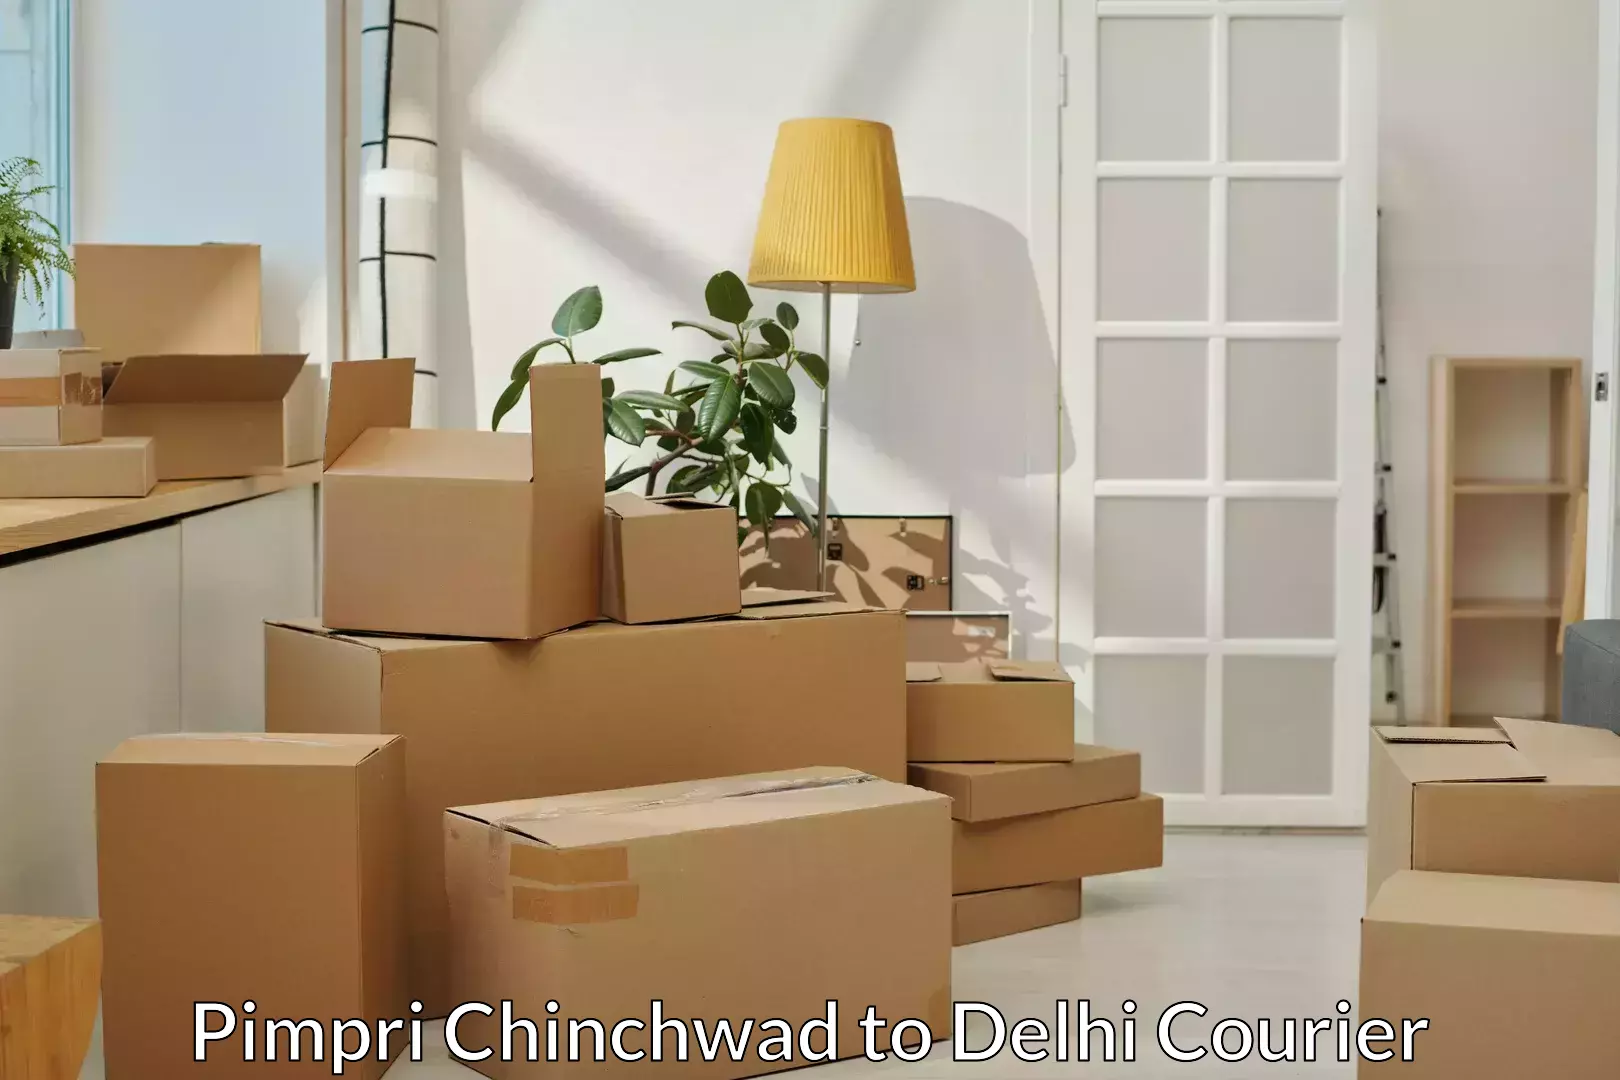 Full-service household moving Pimpri Chinchwad to NCR